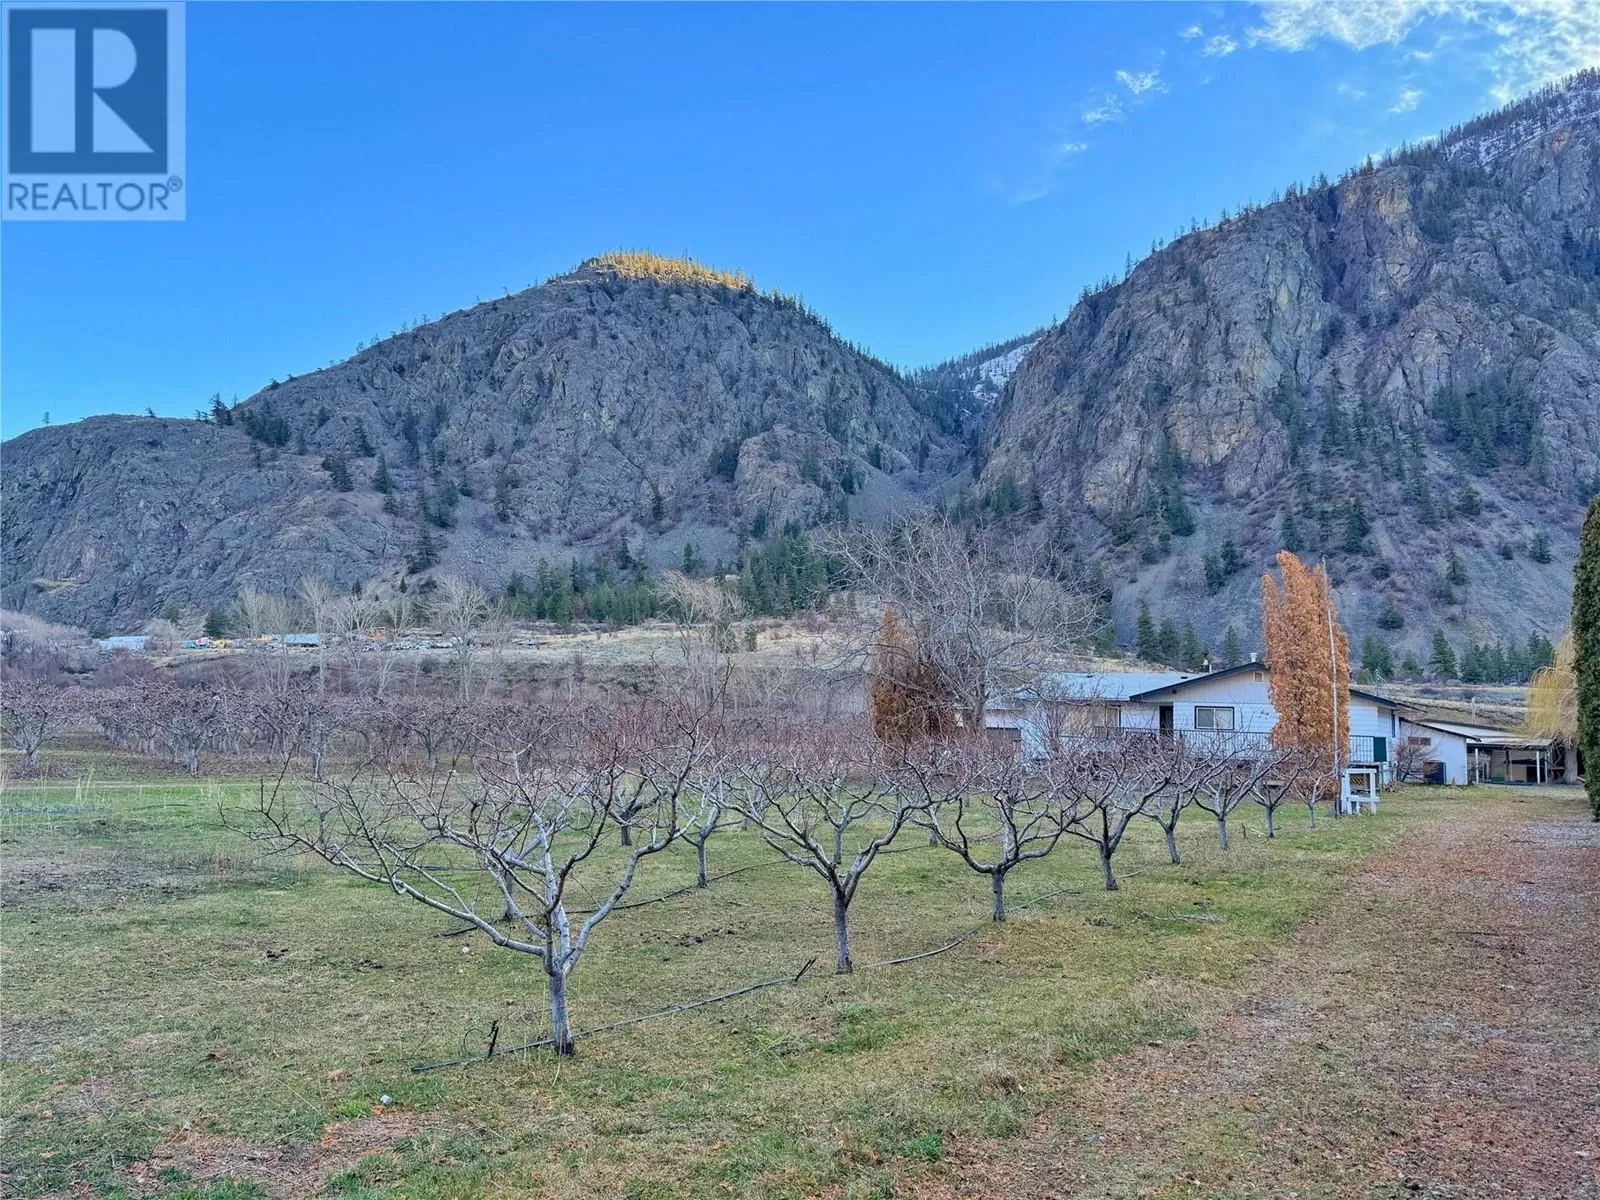 House for rent: 3219 River Road, Keremeos, British Columbia V0X 1N1